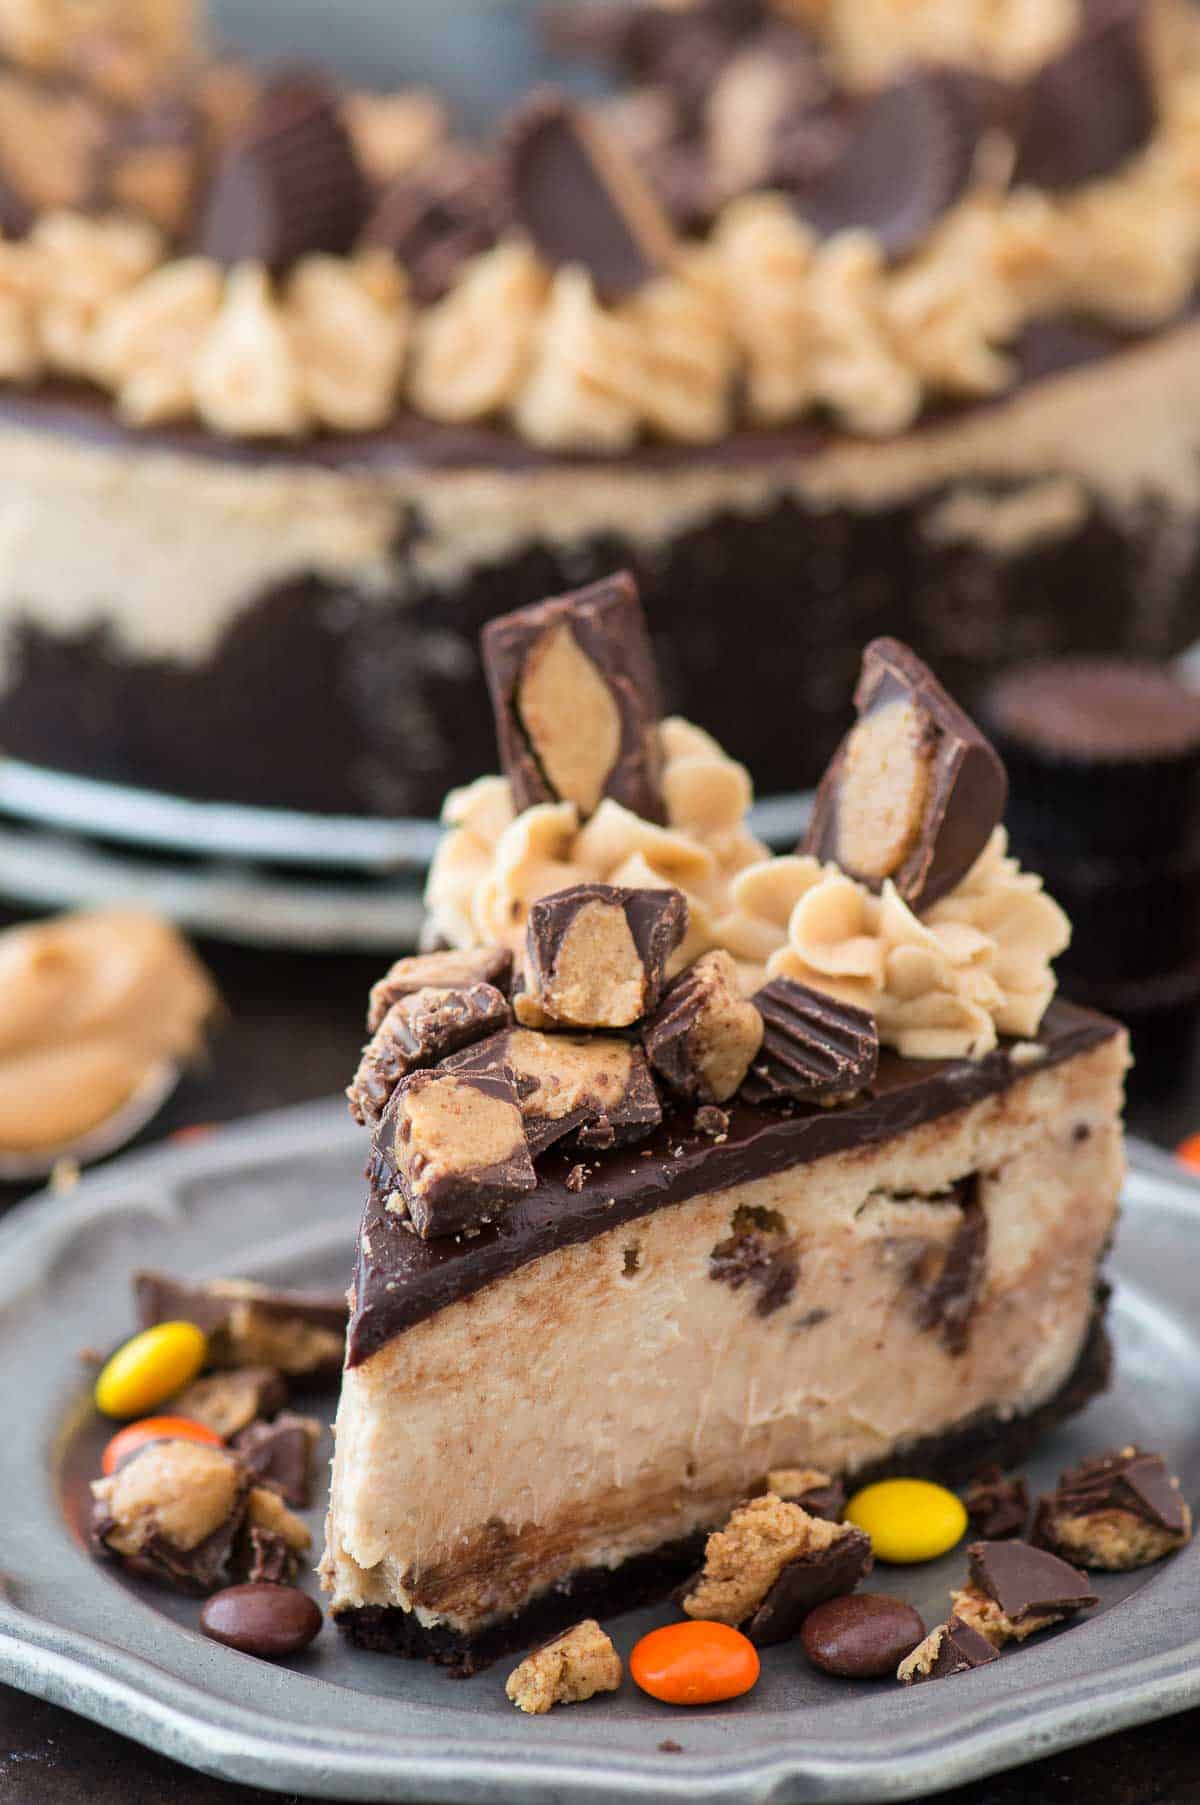 slice of reese's cheesecake with chocolate ganache and more reese's cup on metal plate